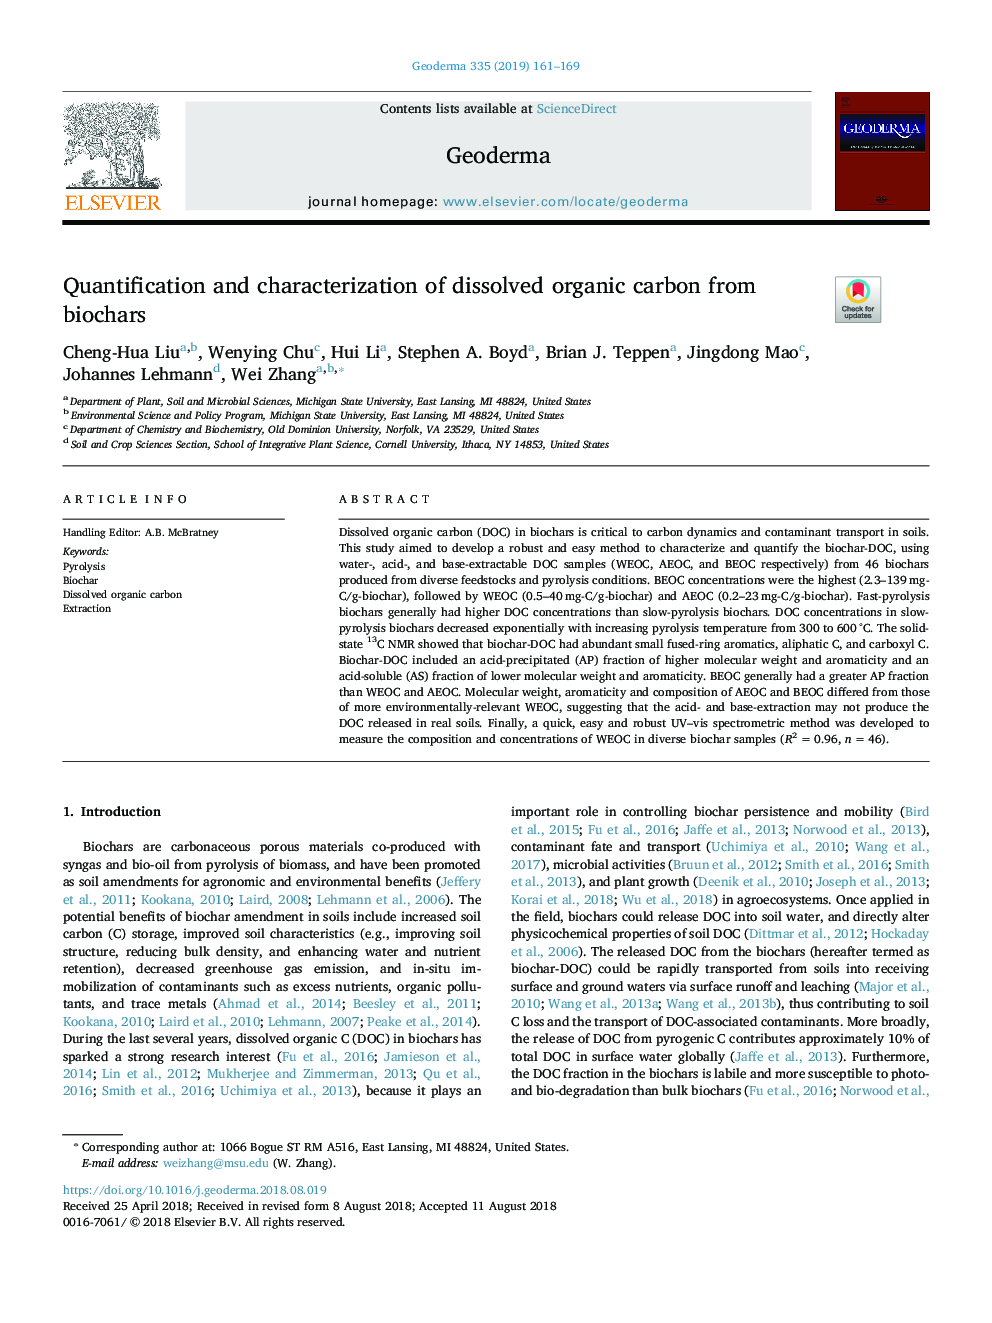 Quantification and characterization of dissolved organic carbon from biochars